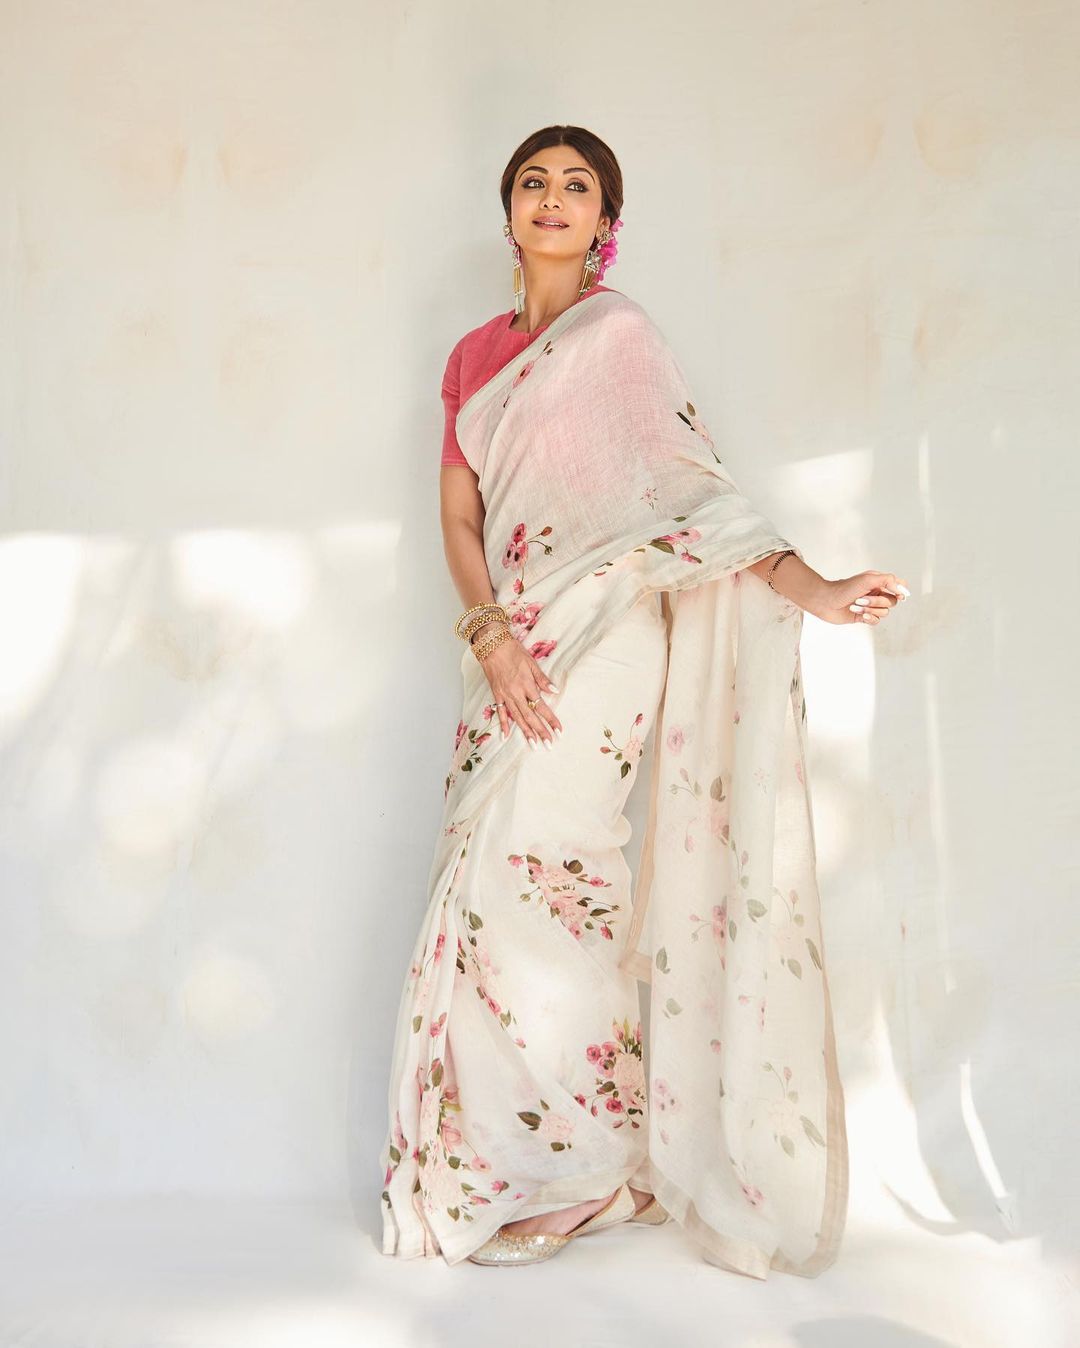 Shilpa Shetty played the magic of beauty in white sarees, see photos 9843